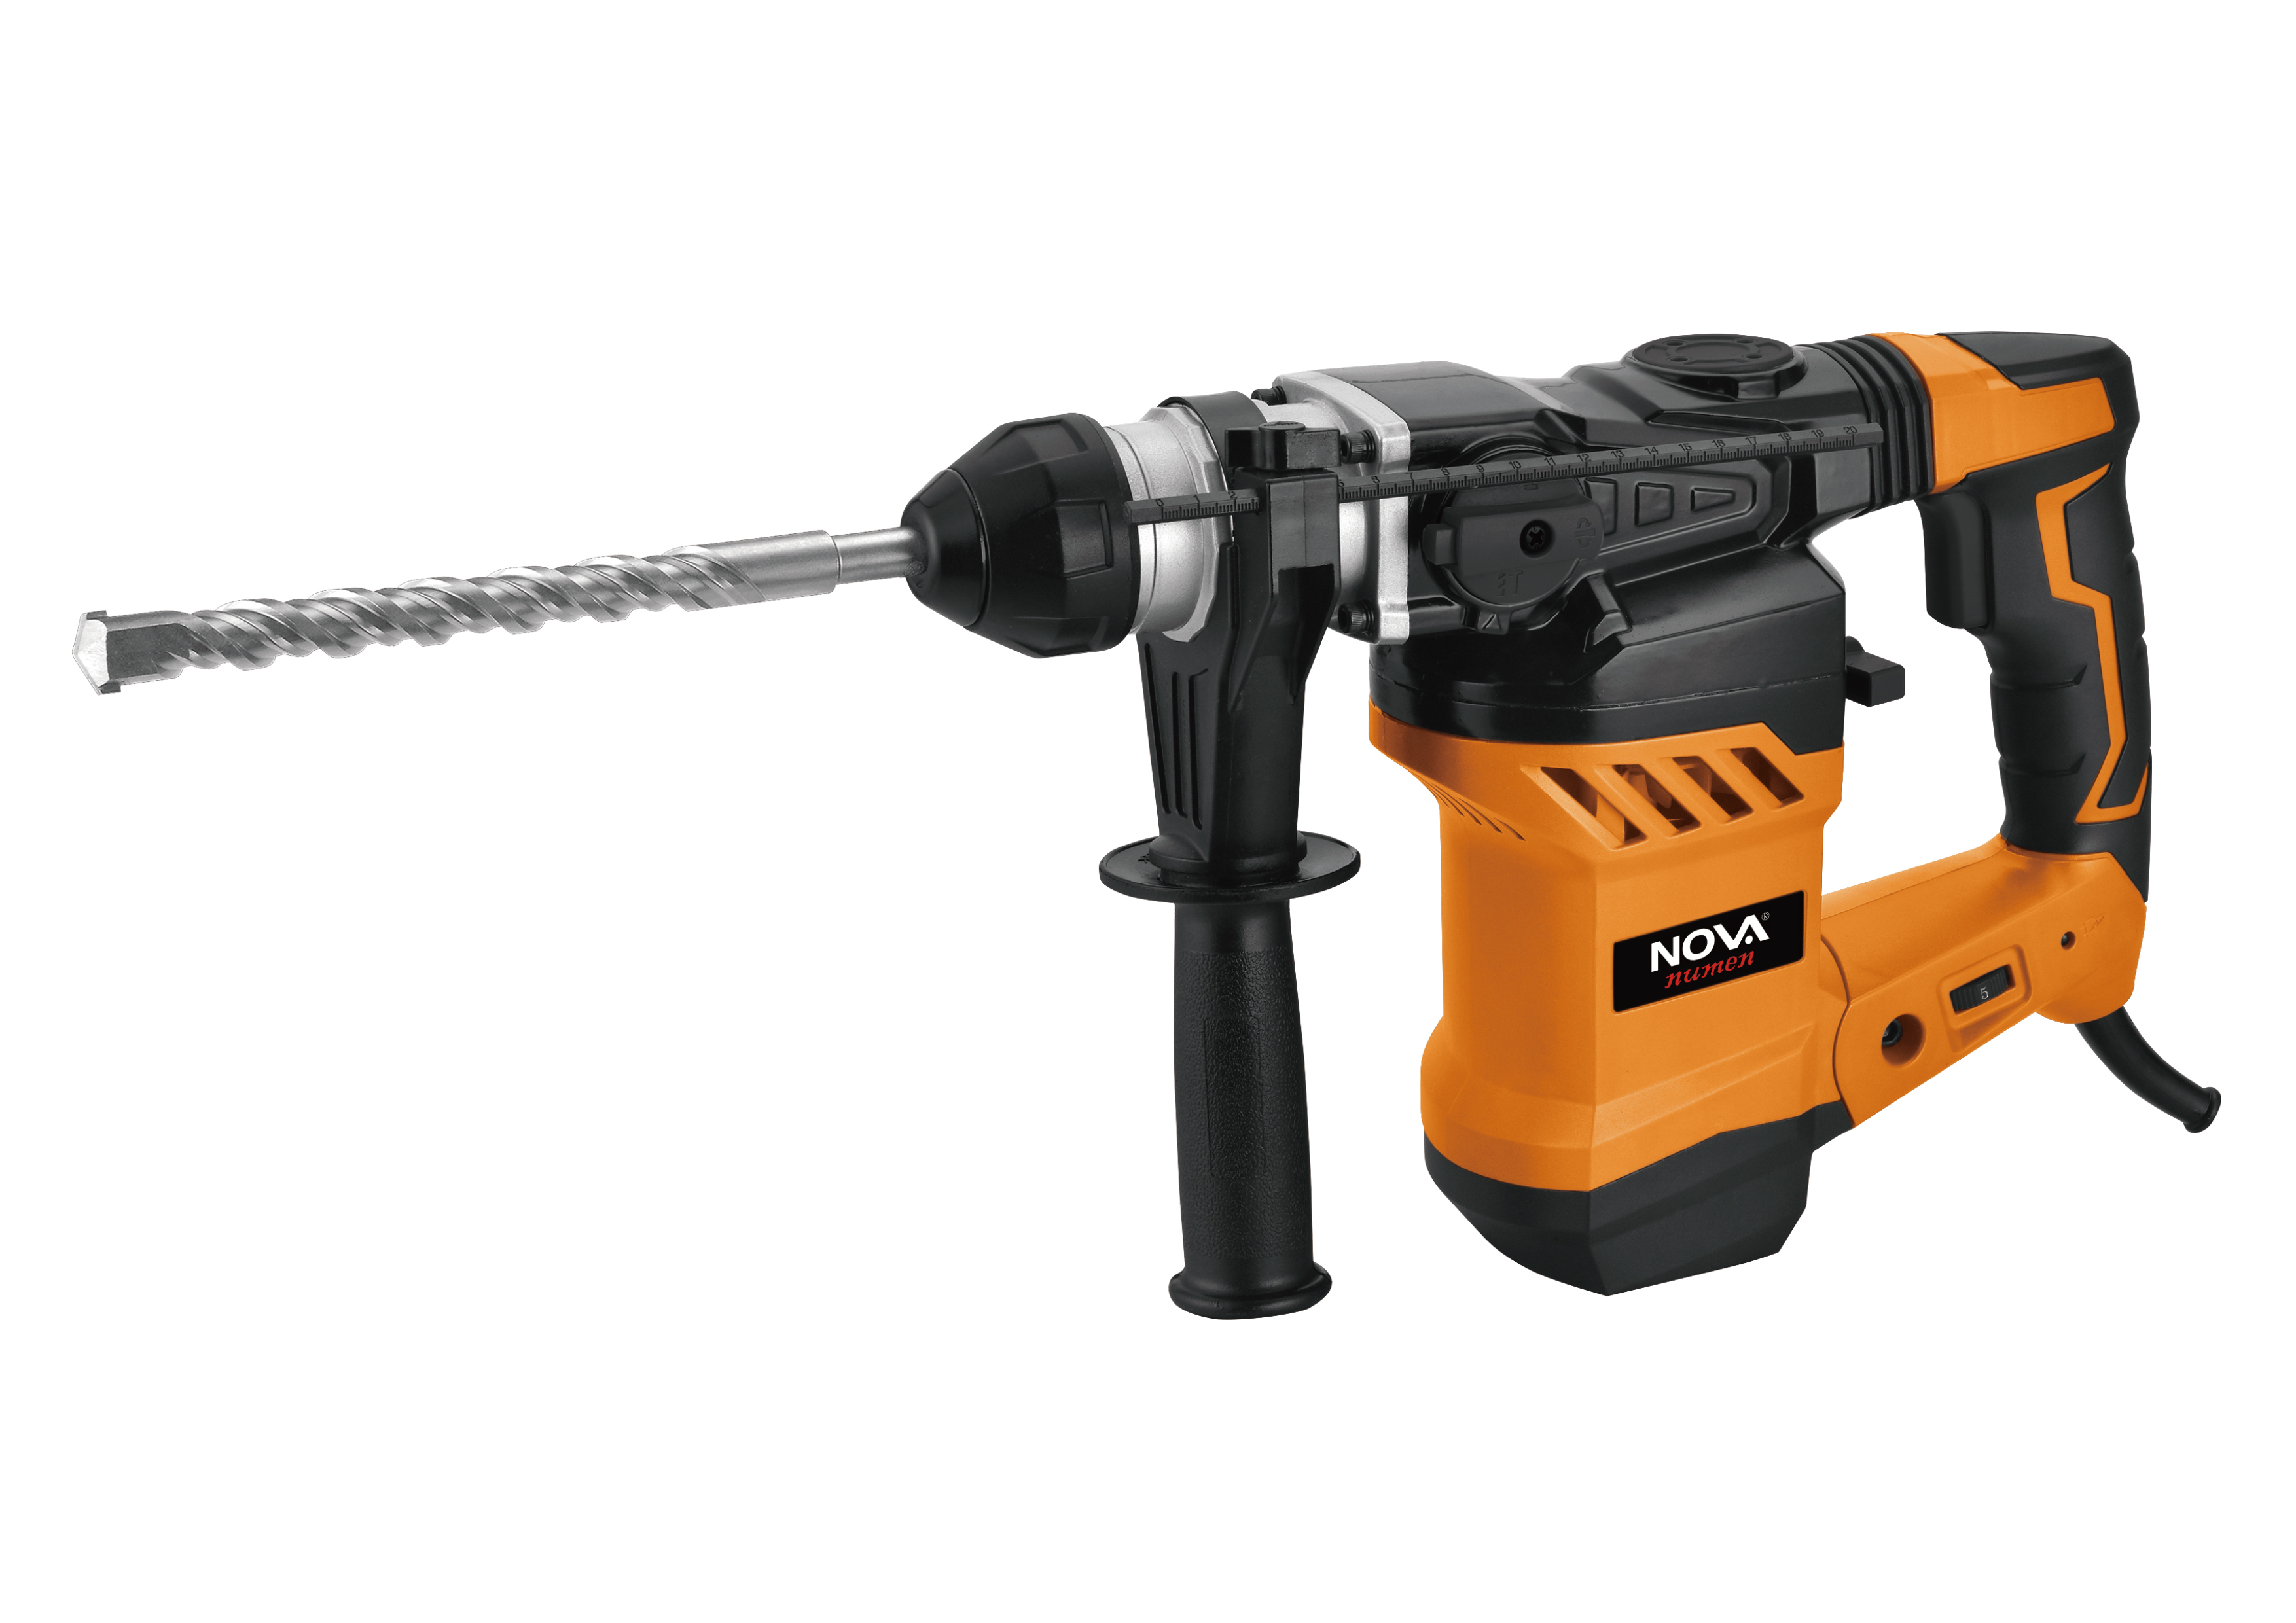 1600W SDS+ Rotary Hammer, 4 functions